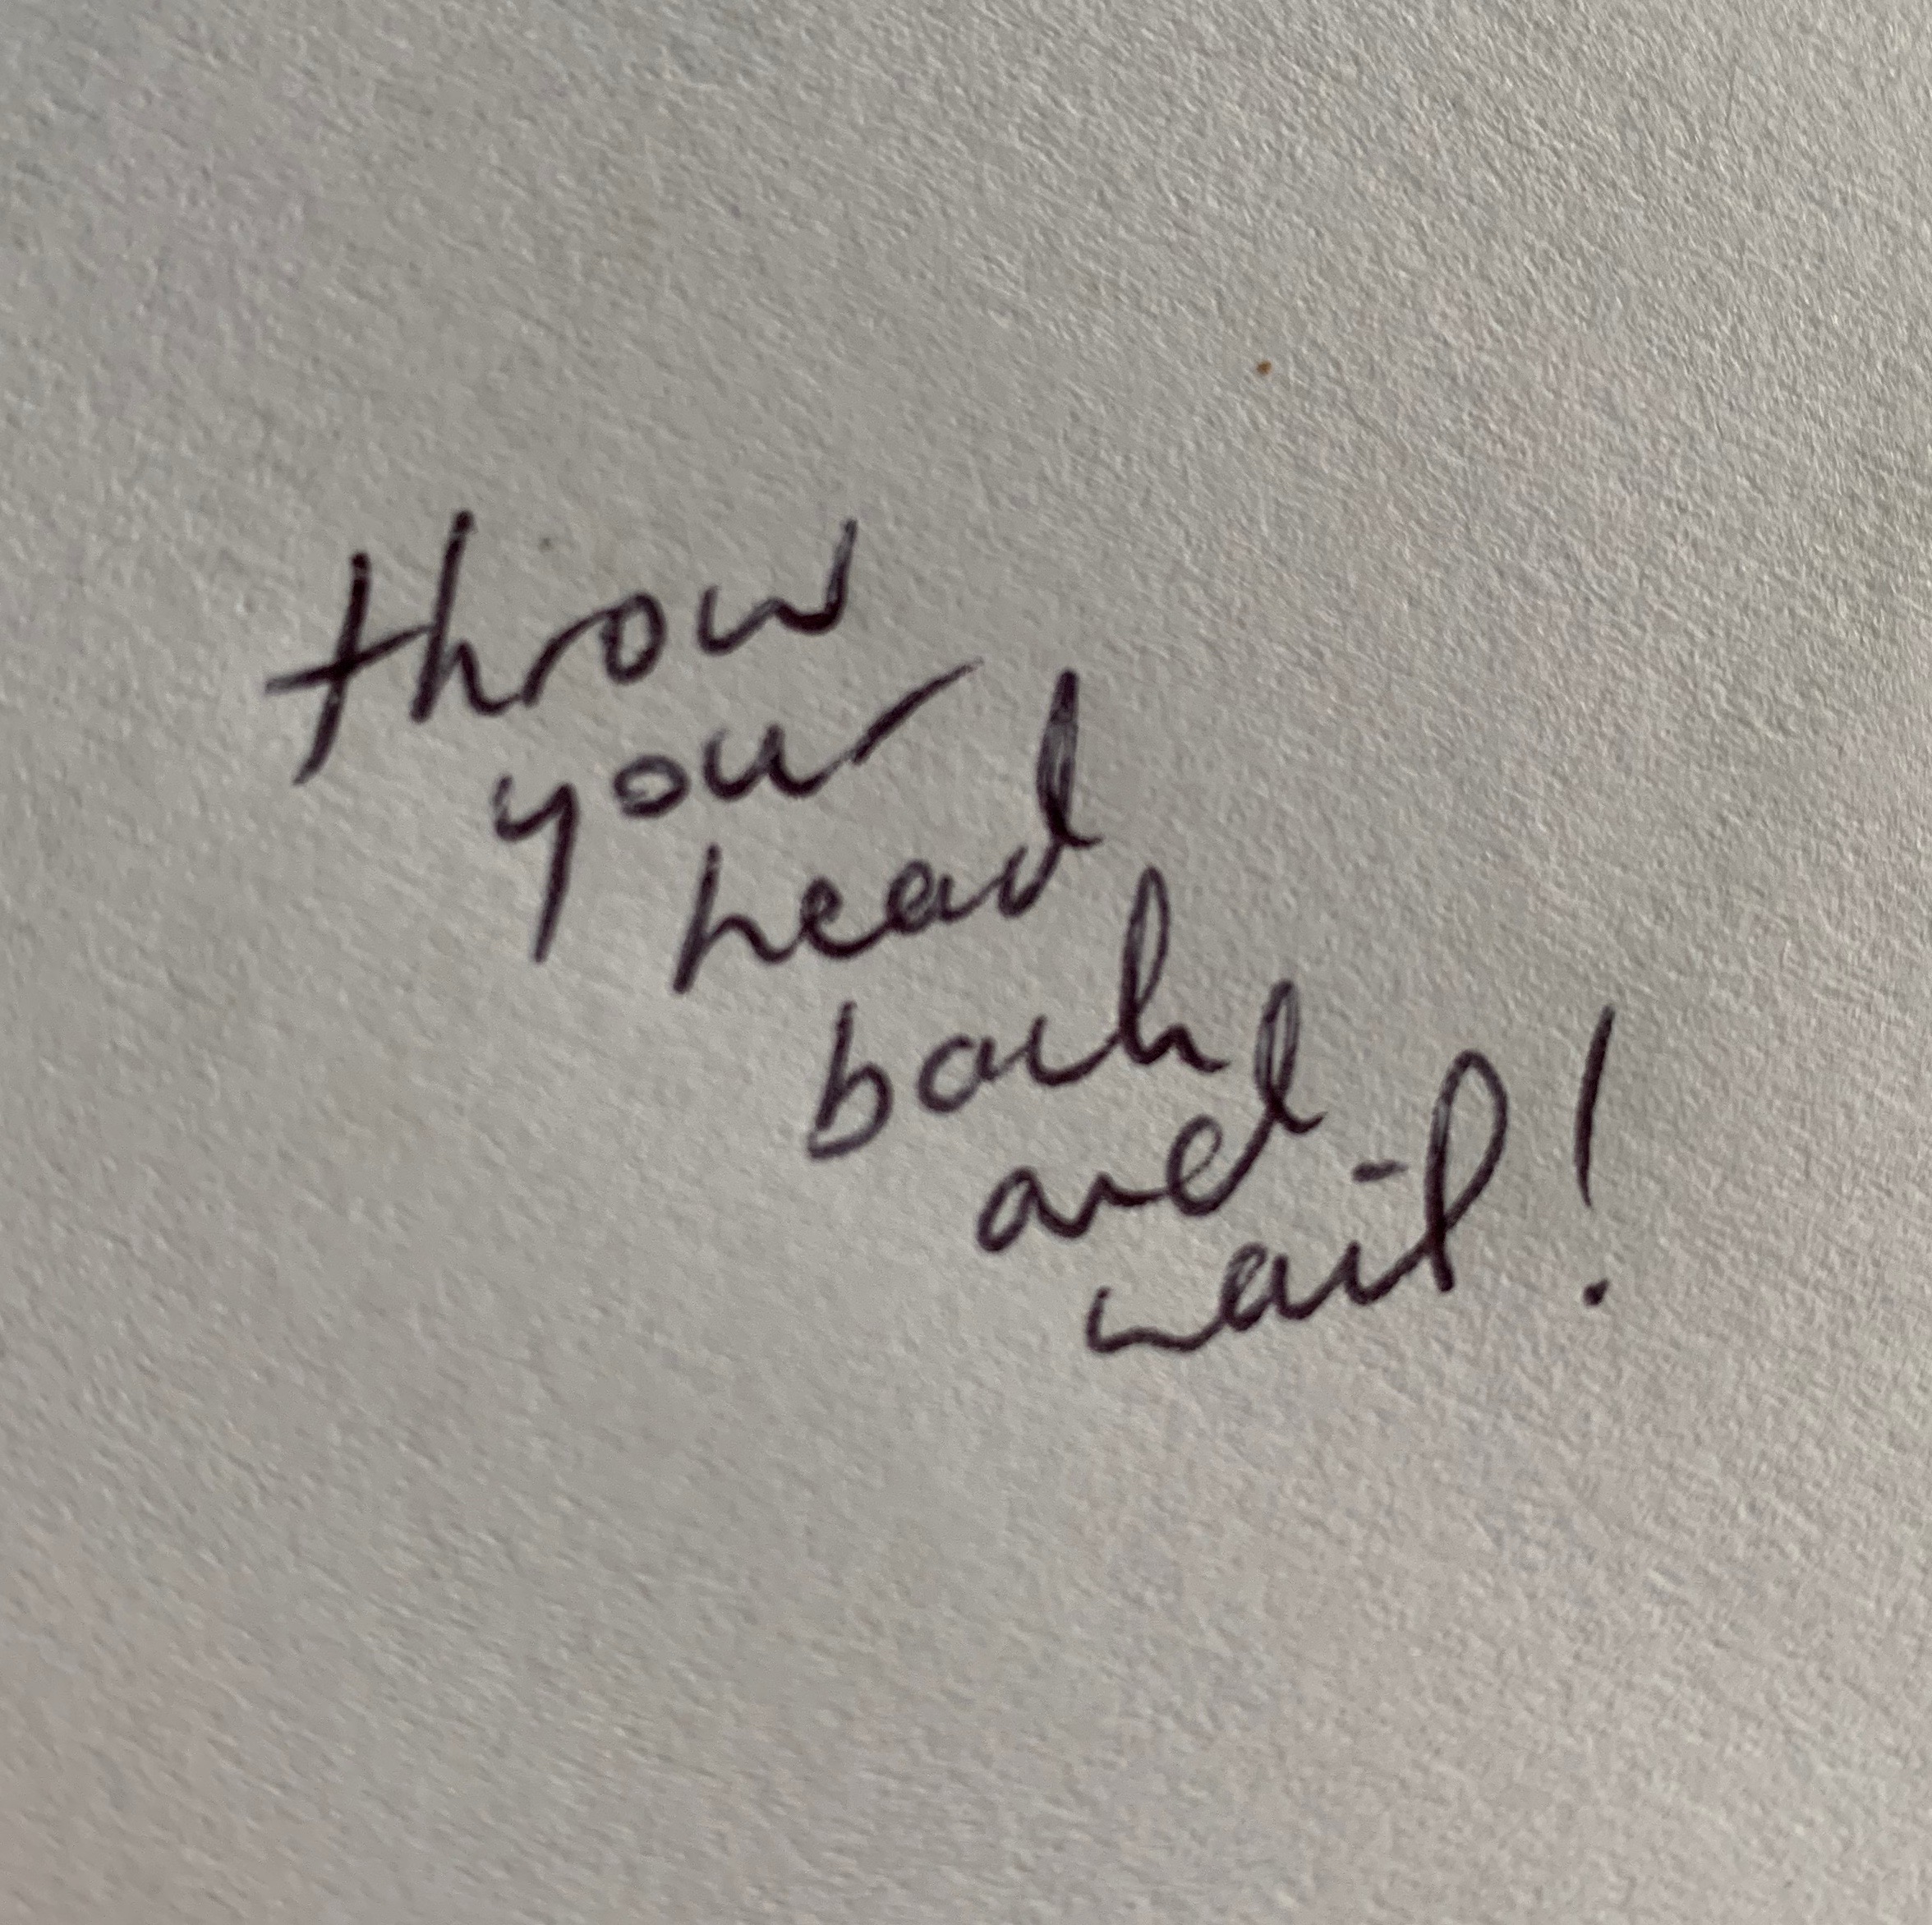 Photo of an excerpt from musician Julia Jacklin's instruction. It reads ‘Throw your head back and wail!’